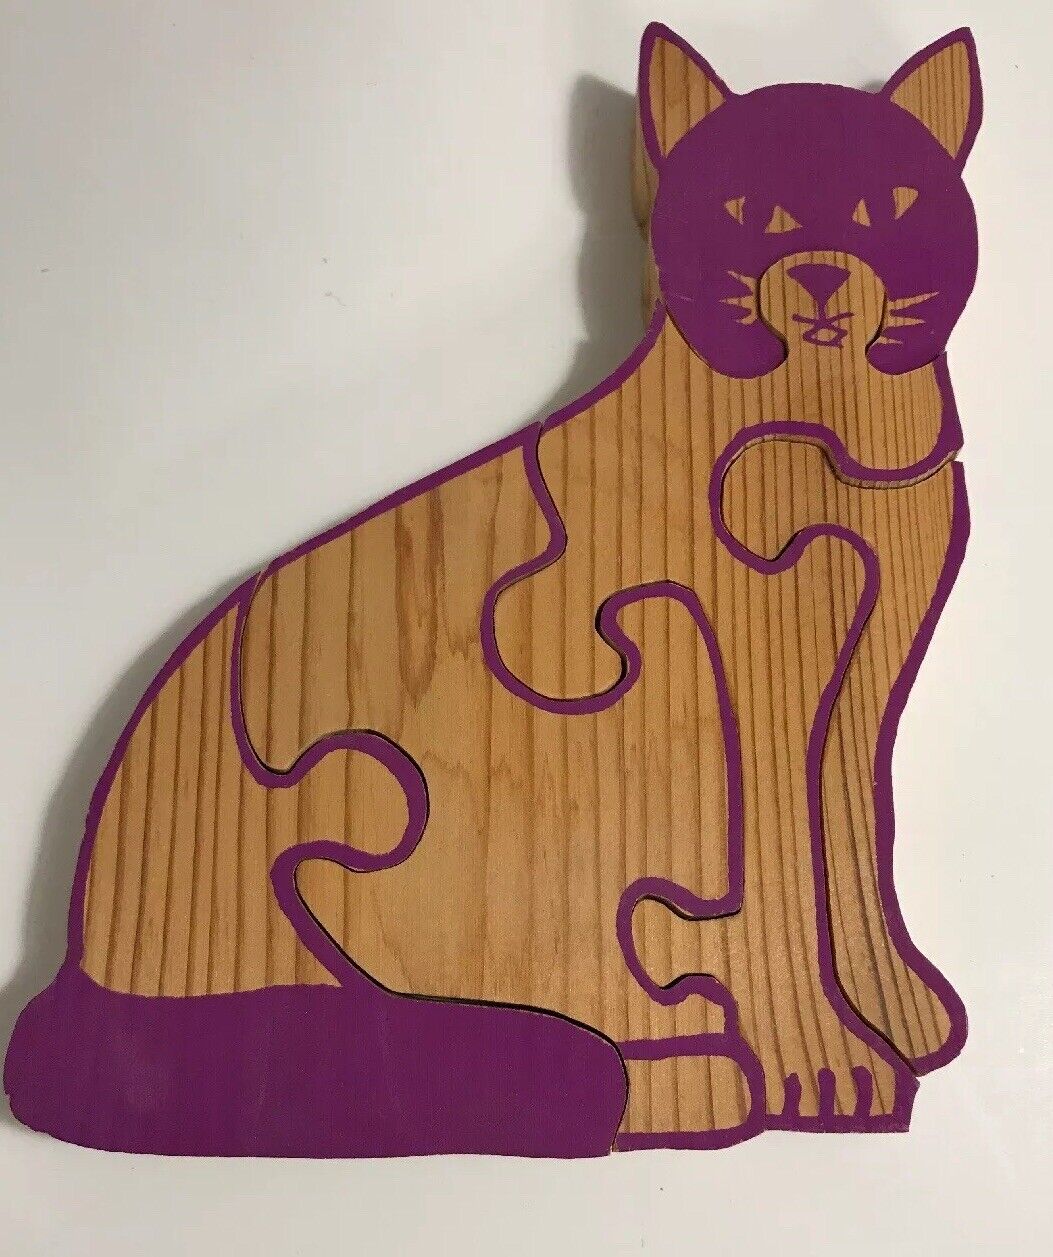 5 Piece Wooden Cat Puzzle Wood Chunky Kids Cats Kitten Purple And Wood